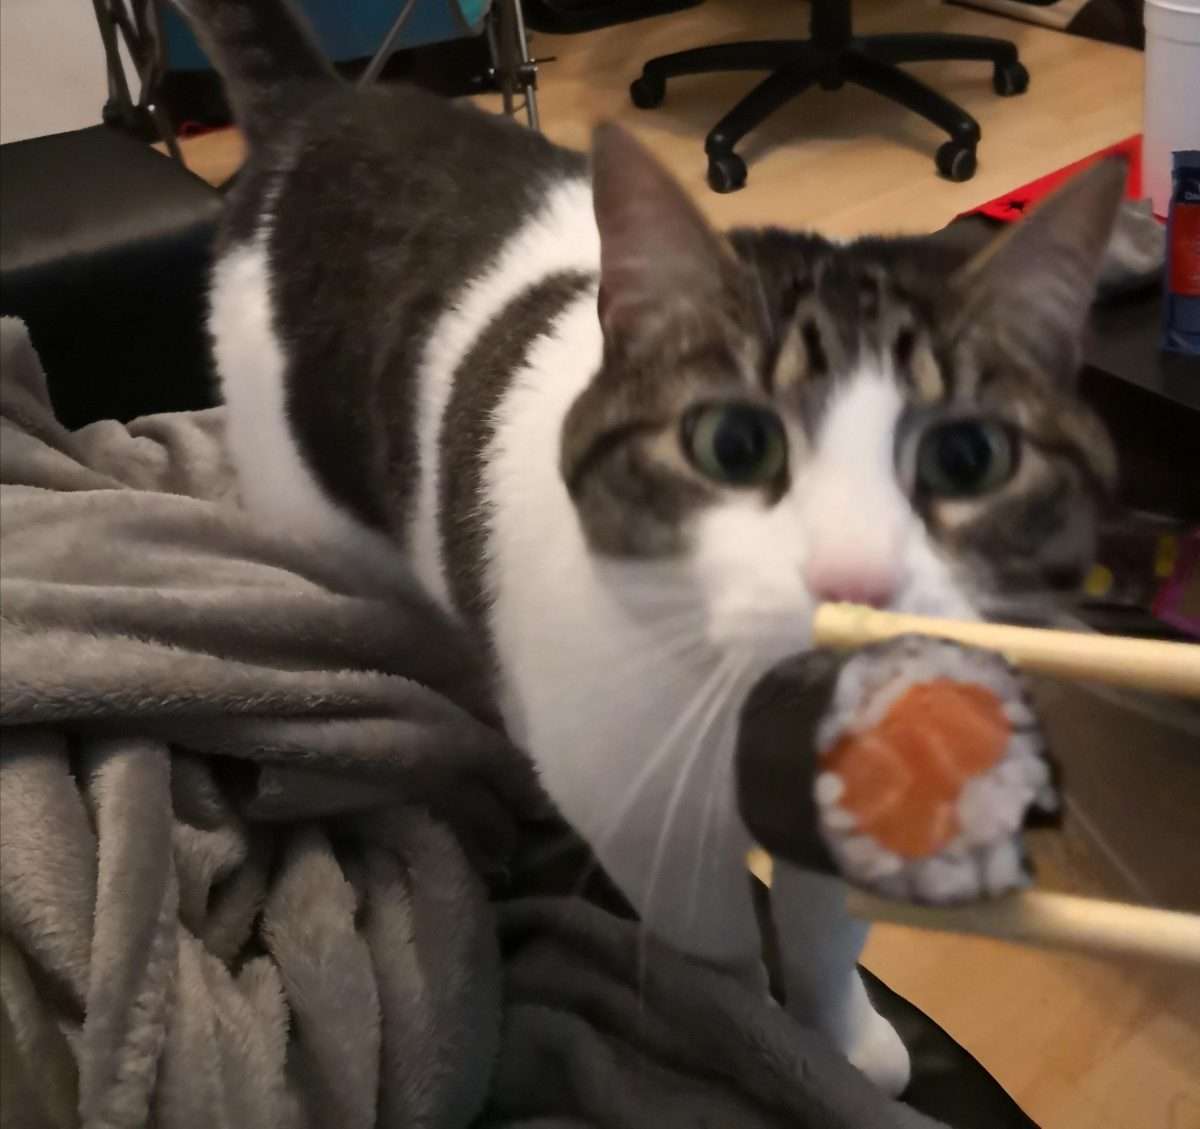 Trying to eat sushi in front of my cat....not my brightest idea : aww